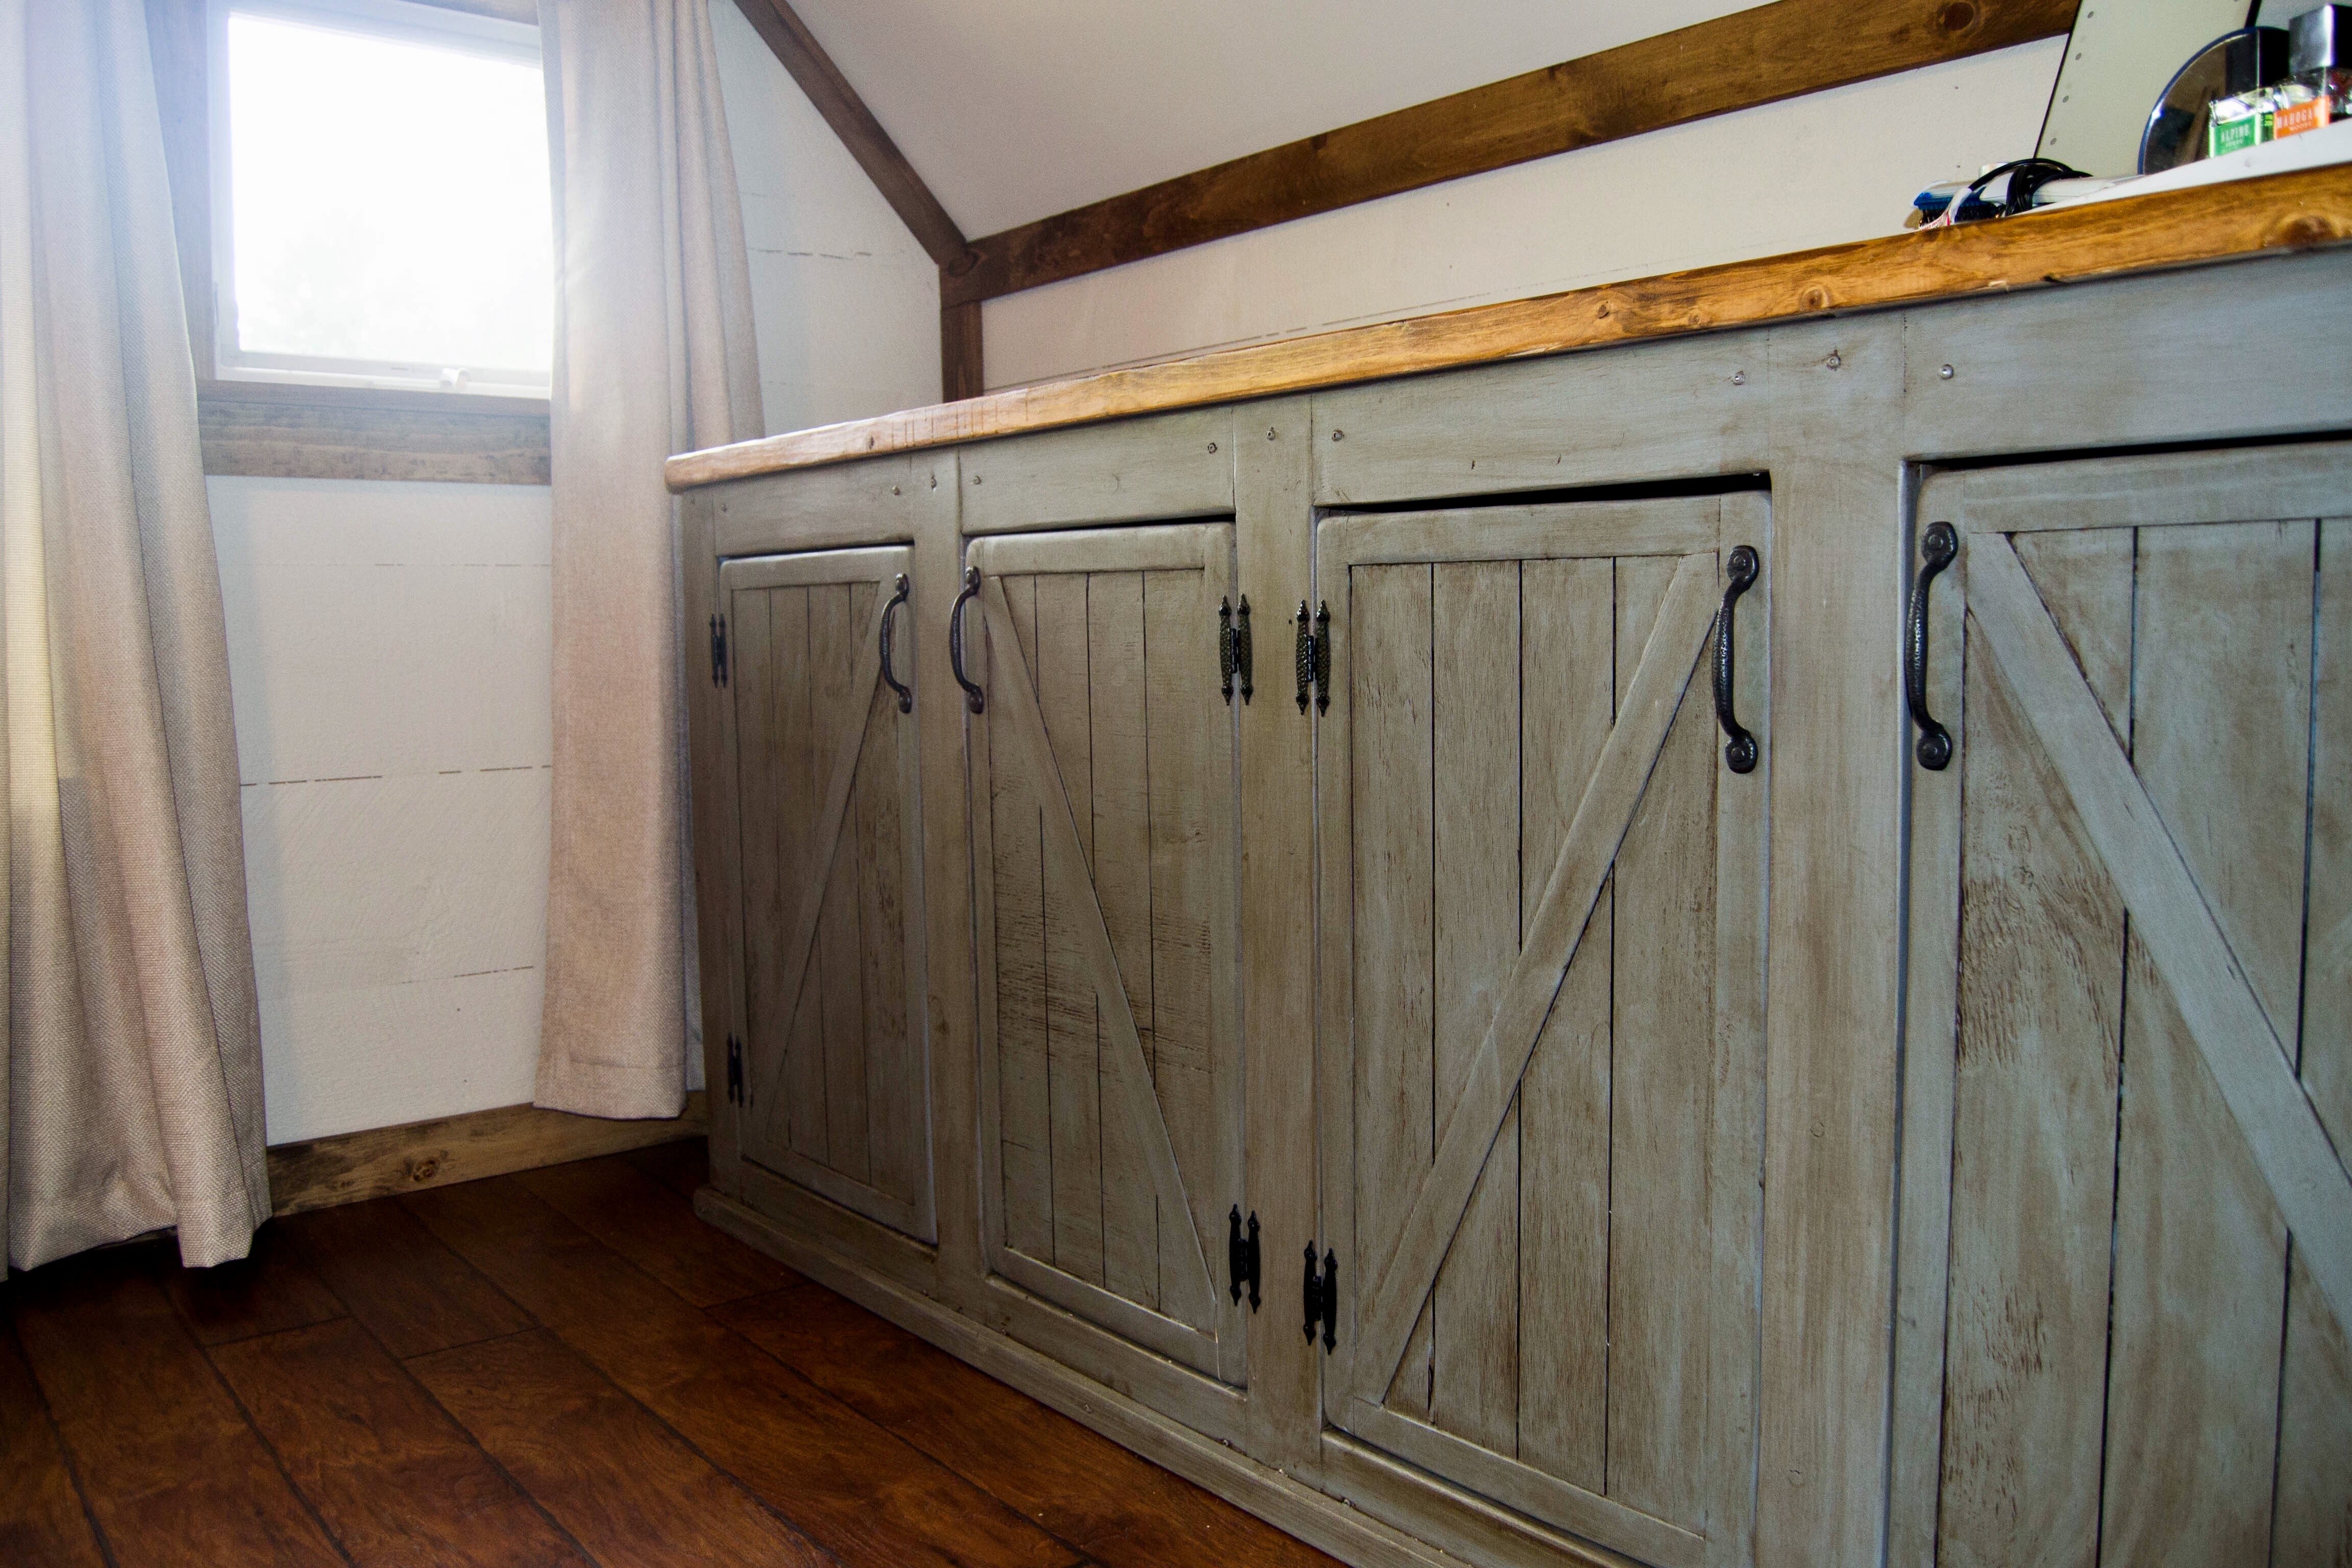 Ana White | Scrapped the Sliding Barn Doors, Rustic Cabinet Doors